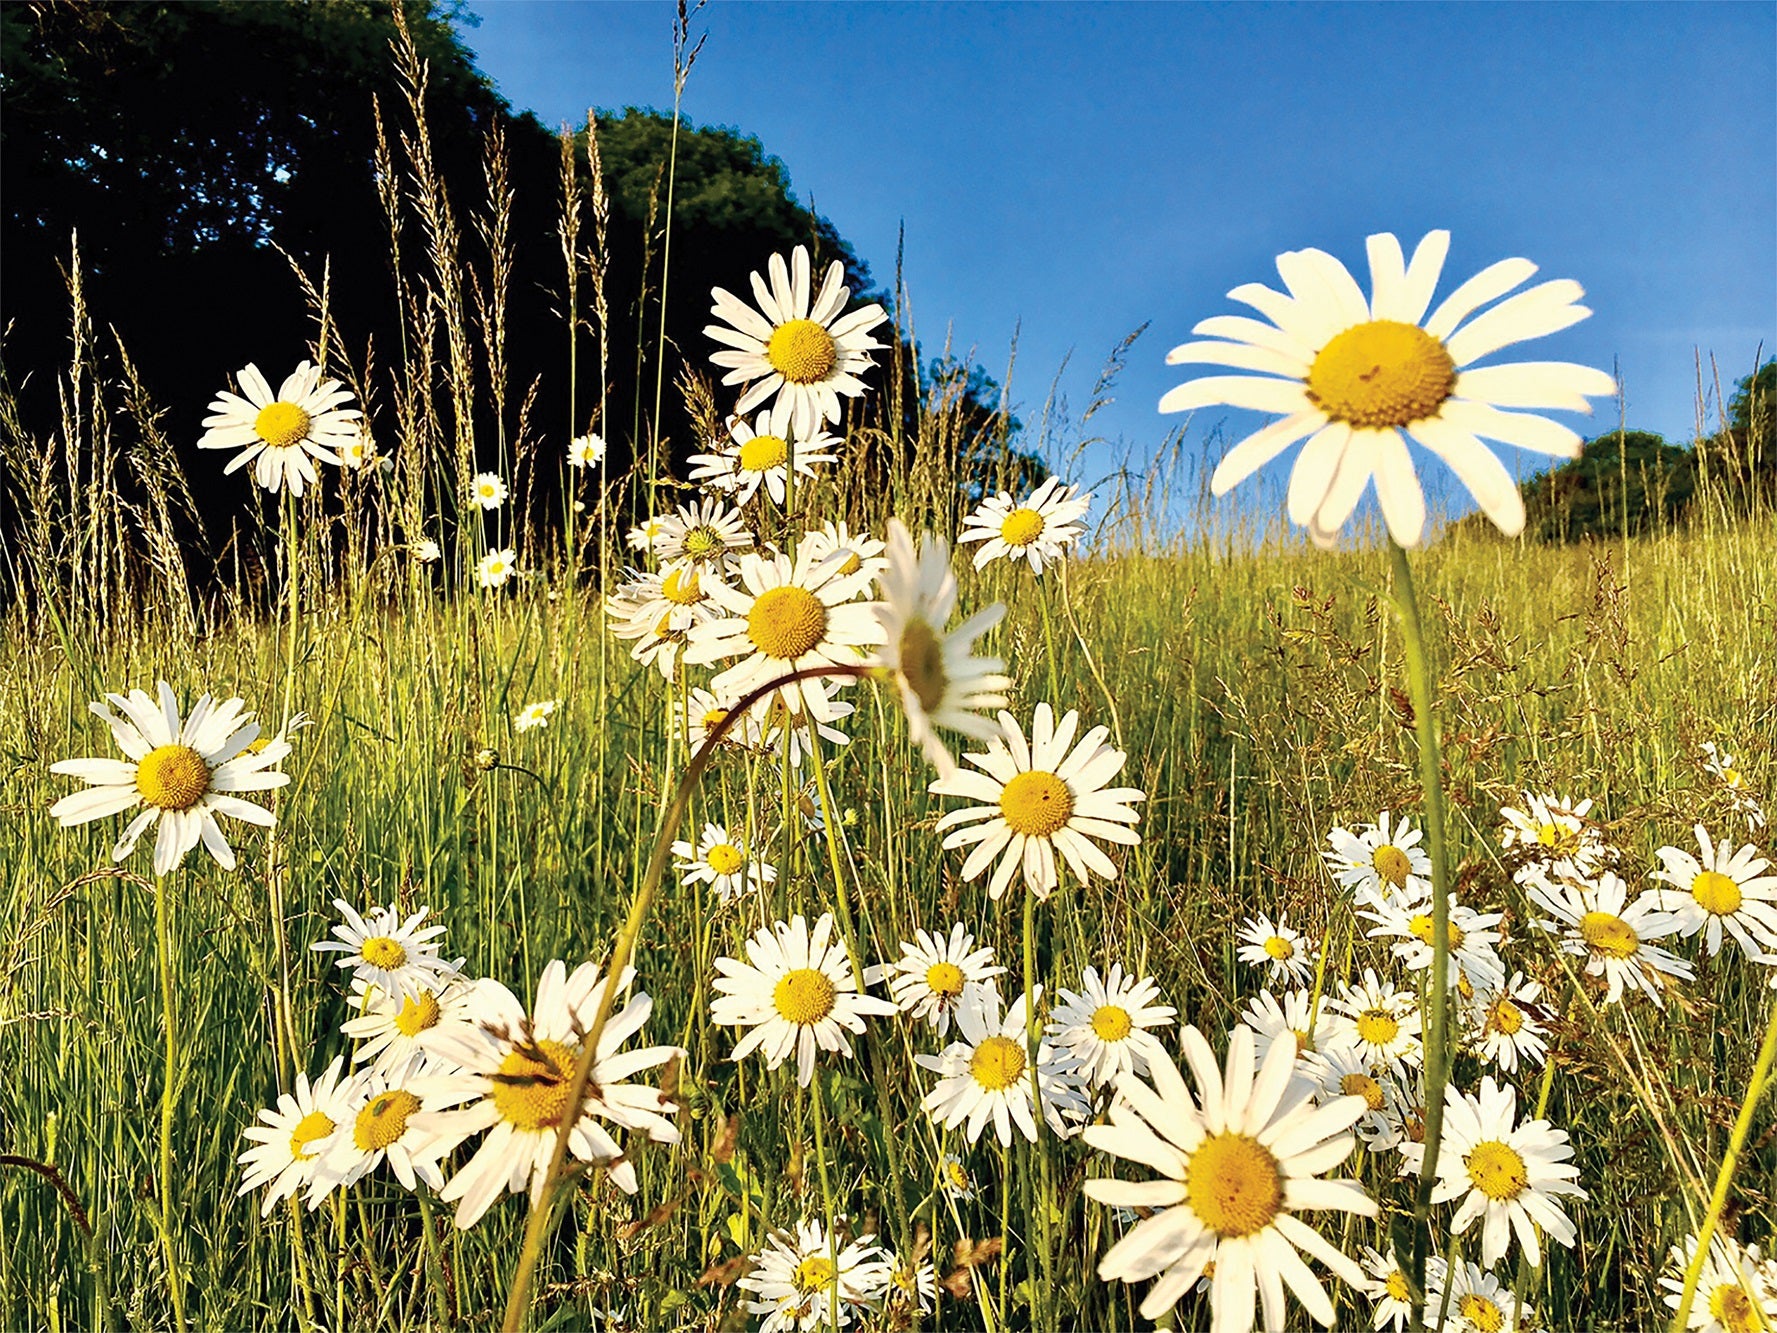 The 20-year-old photographer said his daisy photograph is his mum’s favourite